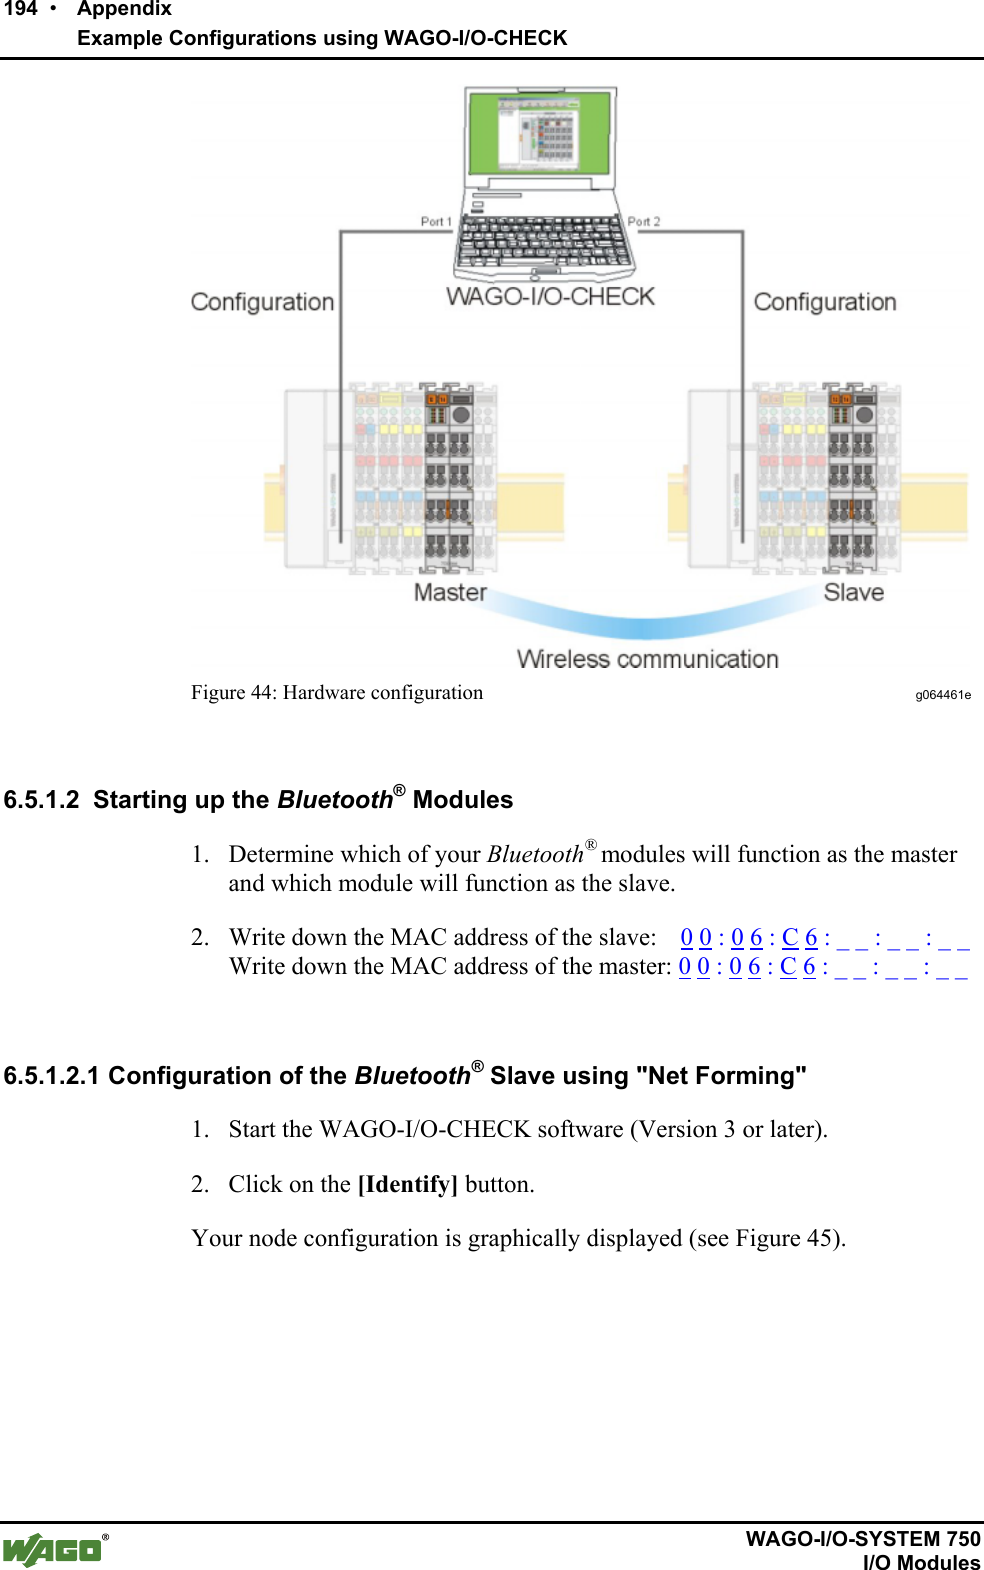 194  •    Appendix      Example Configurations using WAGO-I/O-CHECK       WAGO-I/O-SYSTEM 750   I/O Modules  Figure 44: Hardware configuration  g064461e  6.5.1.2  Starting up the Bluetooth® Modules 1.  Determine which of your Bluetooth® modules will function as the master and which module will function as the slave. 2.  Write down the MAC address of the slave:    0 0 : 0 6 : C 6 : _ _ : _ _ : _ _ Write down the MAC address of the master: 0 0 : 0 6 : C 6 : _ _ : _ _ : _ _          6.5.1.2.1 Configuration of the Bluetooth® Slave using &quot;Net Forming&quot; 1.  Start the WAGO-I/O-CHECK software (Version 3 or later). 2.  Click on the [Identify] button.  Your node configuration is graphically displayed (see Figure 45).  